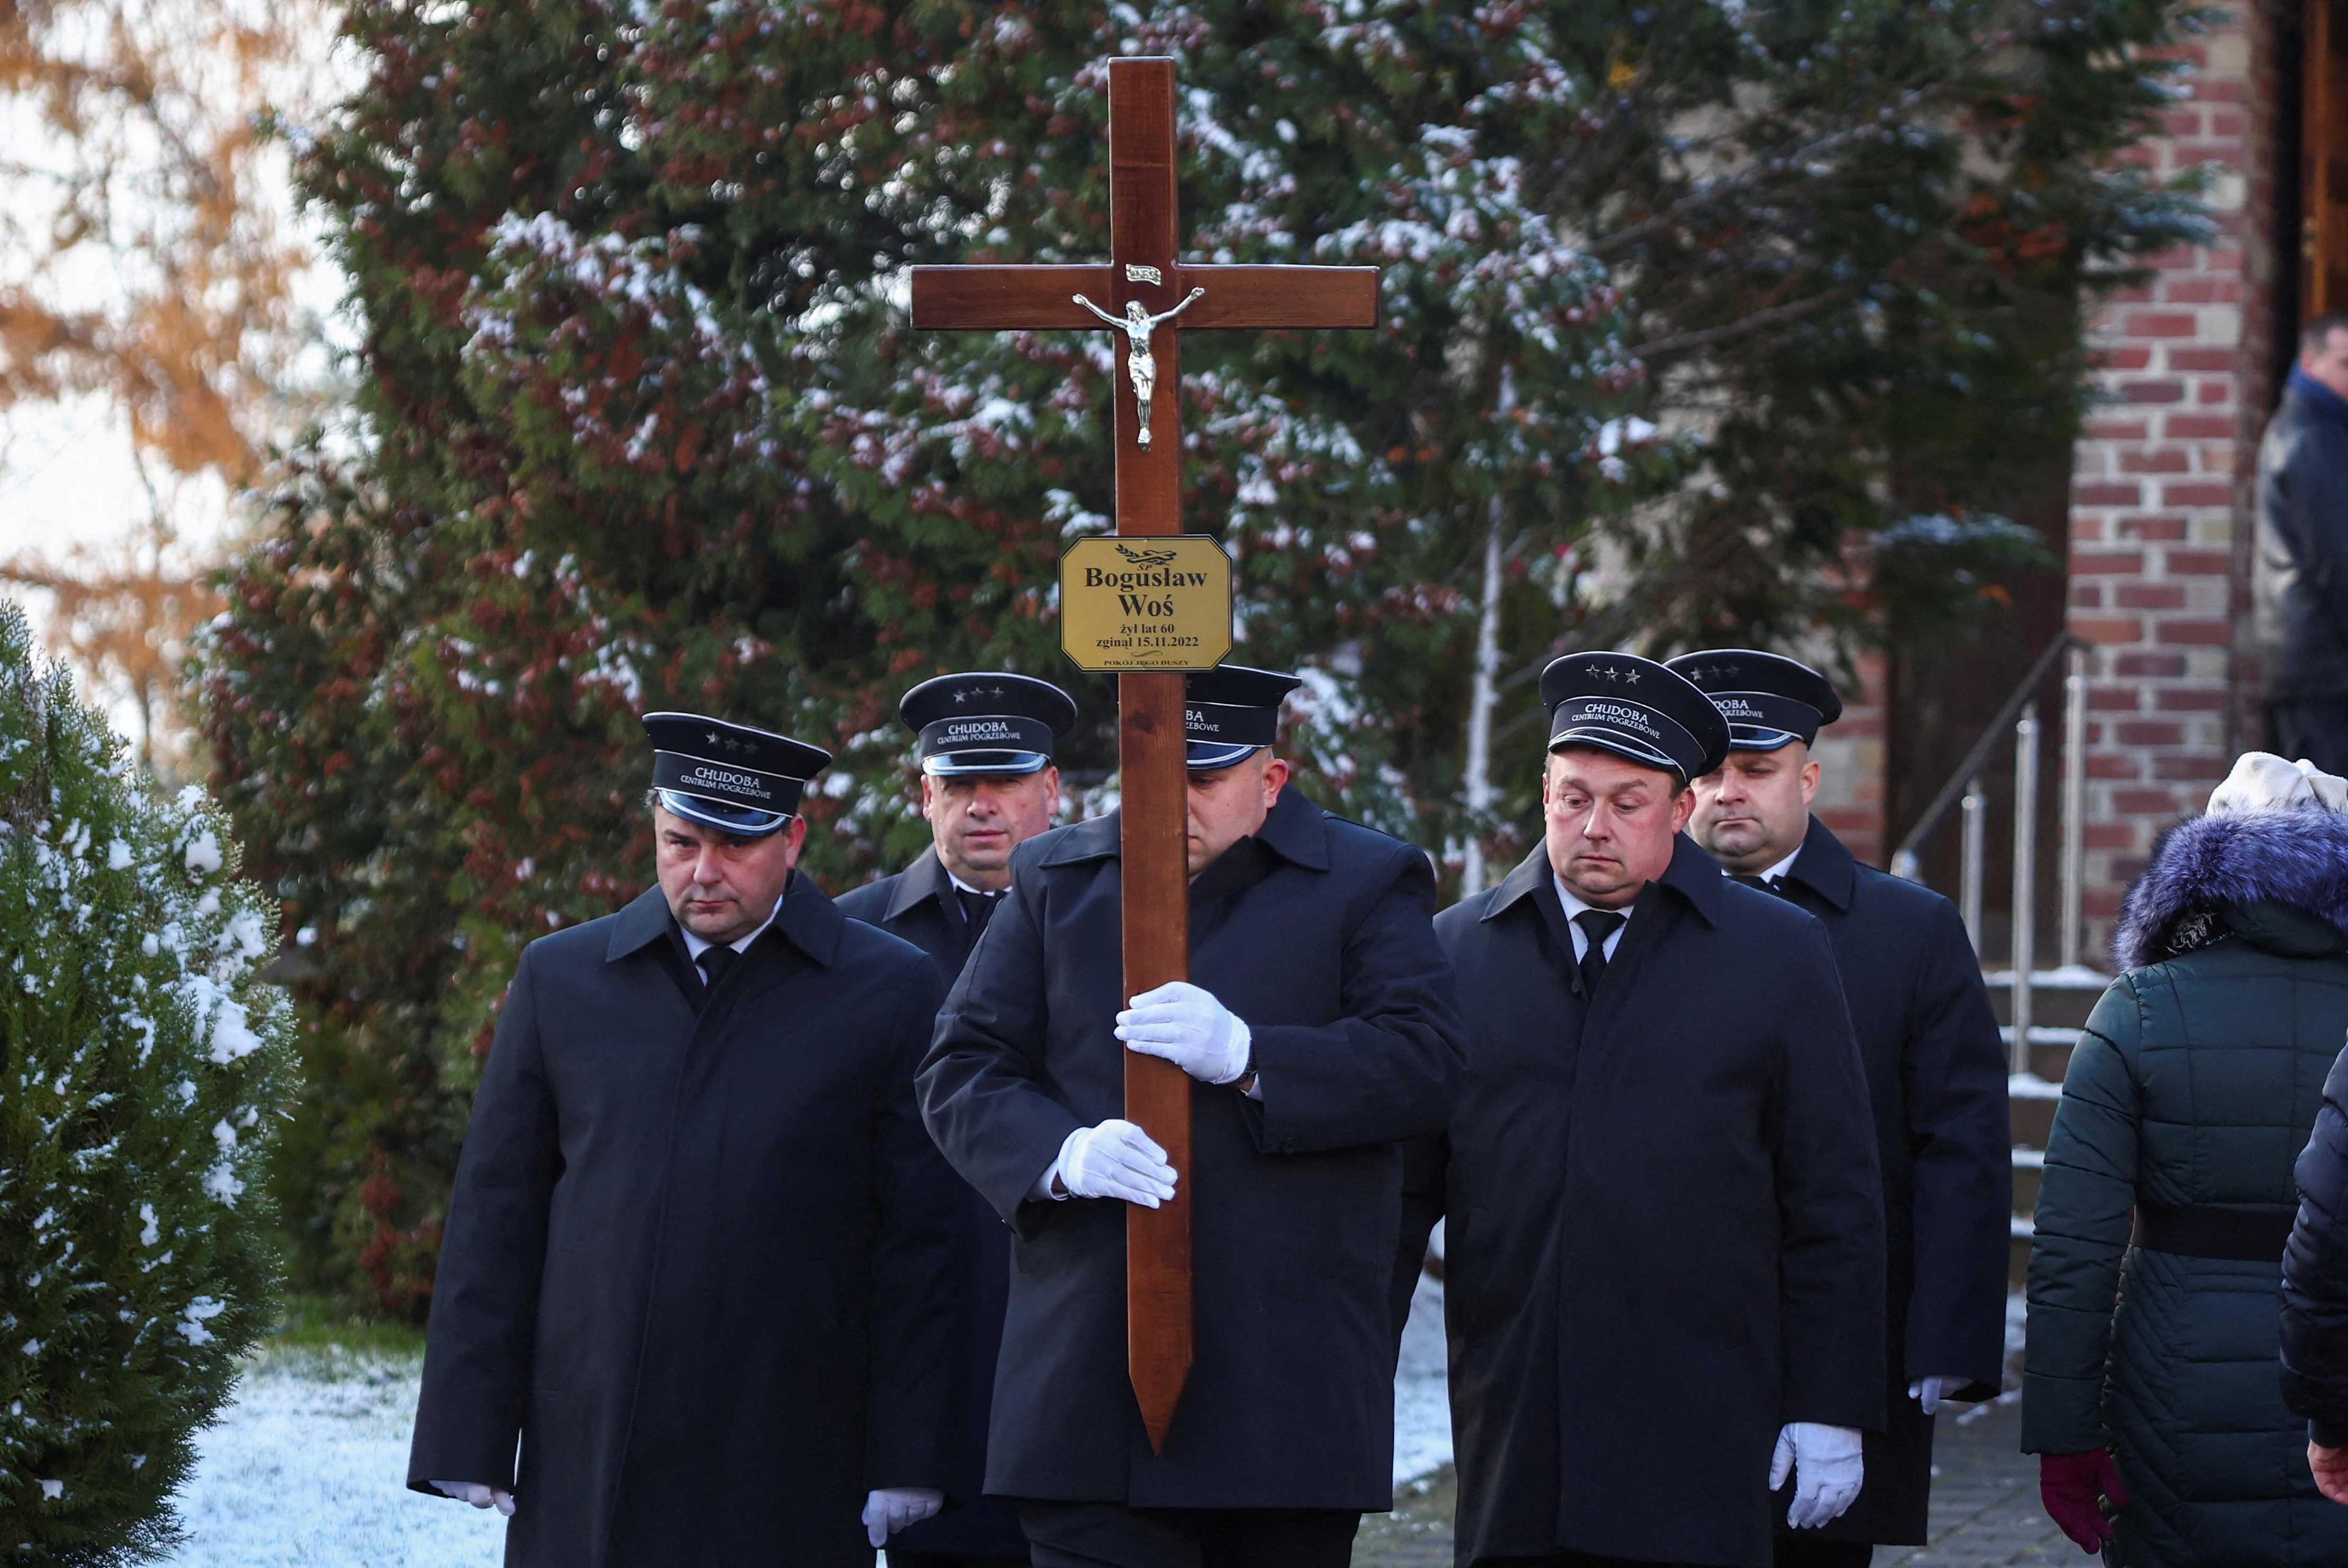 Morticians stand outside a church during the funeral of one of two victims of a missile that hit a southeastern Polish village near the border with Ukraine, in Przewodow, Poland on Nov 19. Photo: Reuters